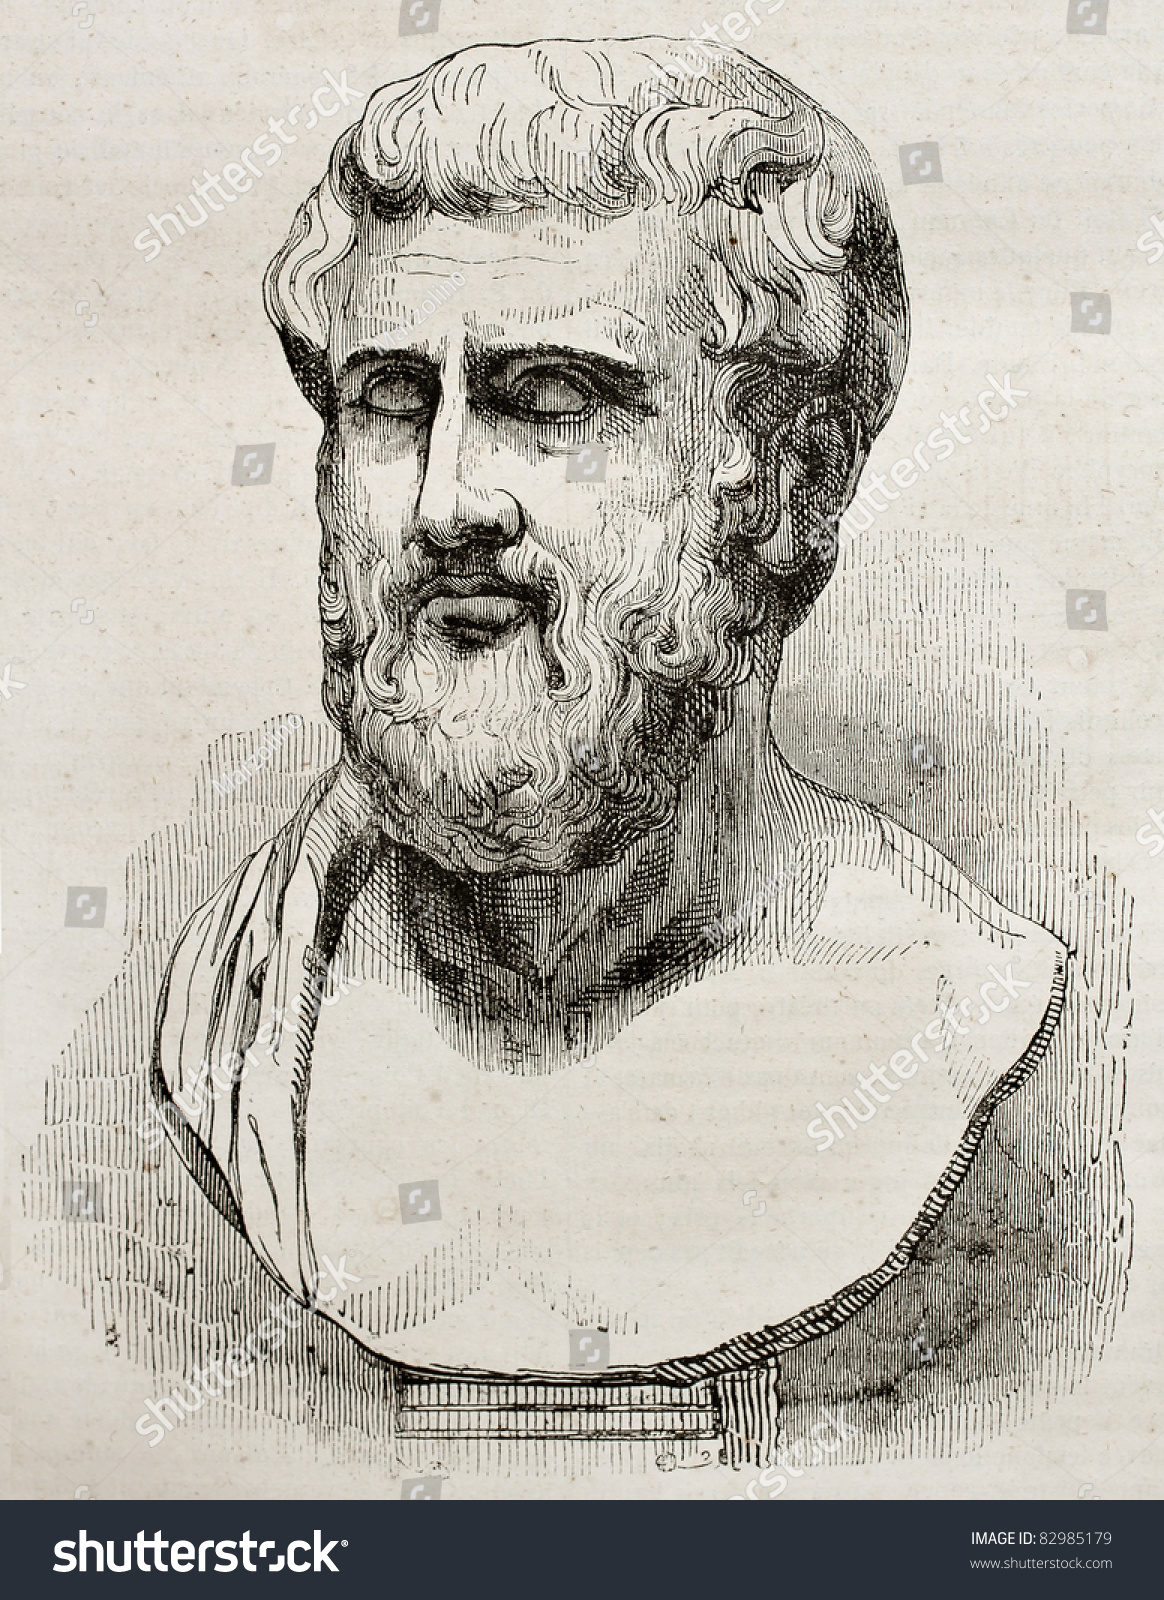 Sophocles Bust Old Illustration. By Unidentified Author, Published On ...